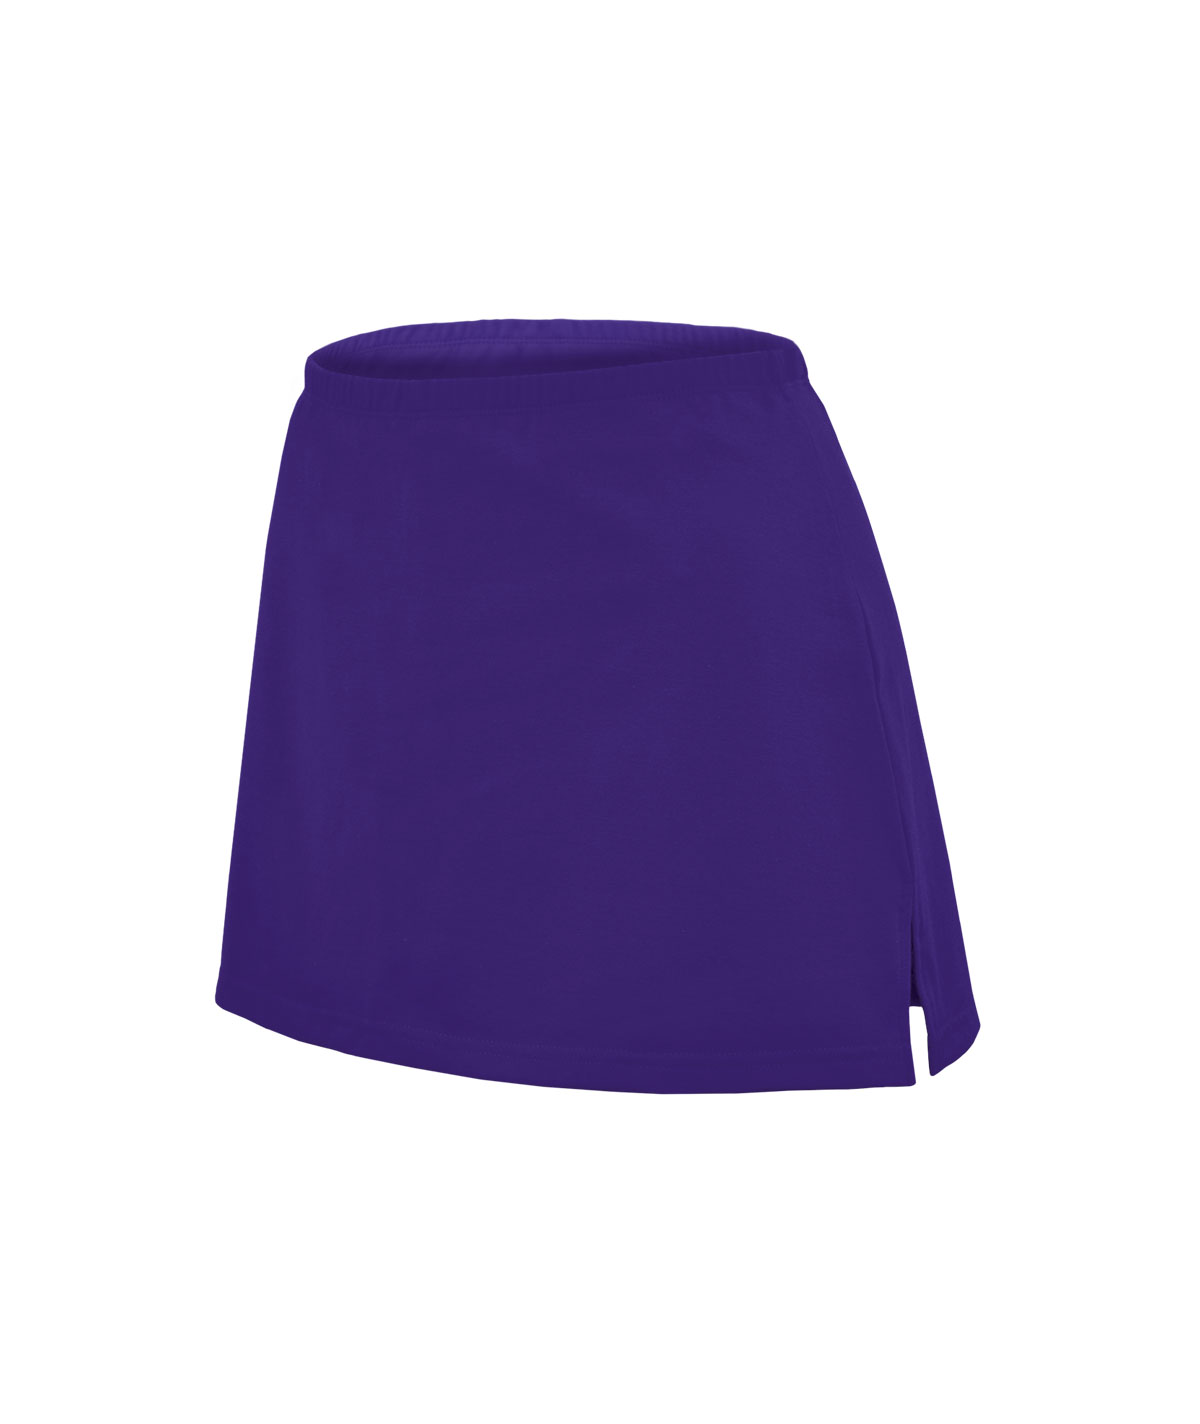 Chasse Skirt with Built In Short